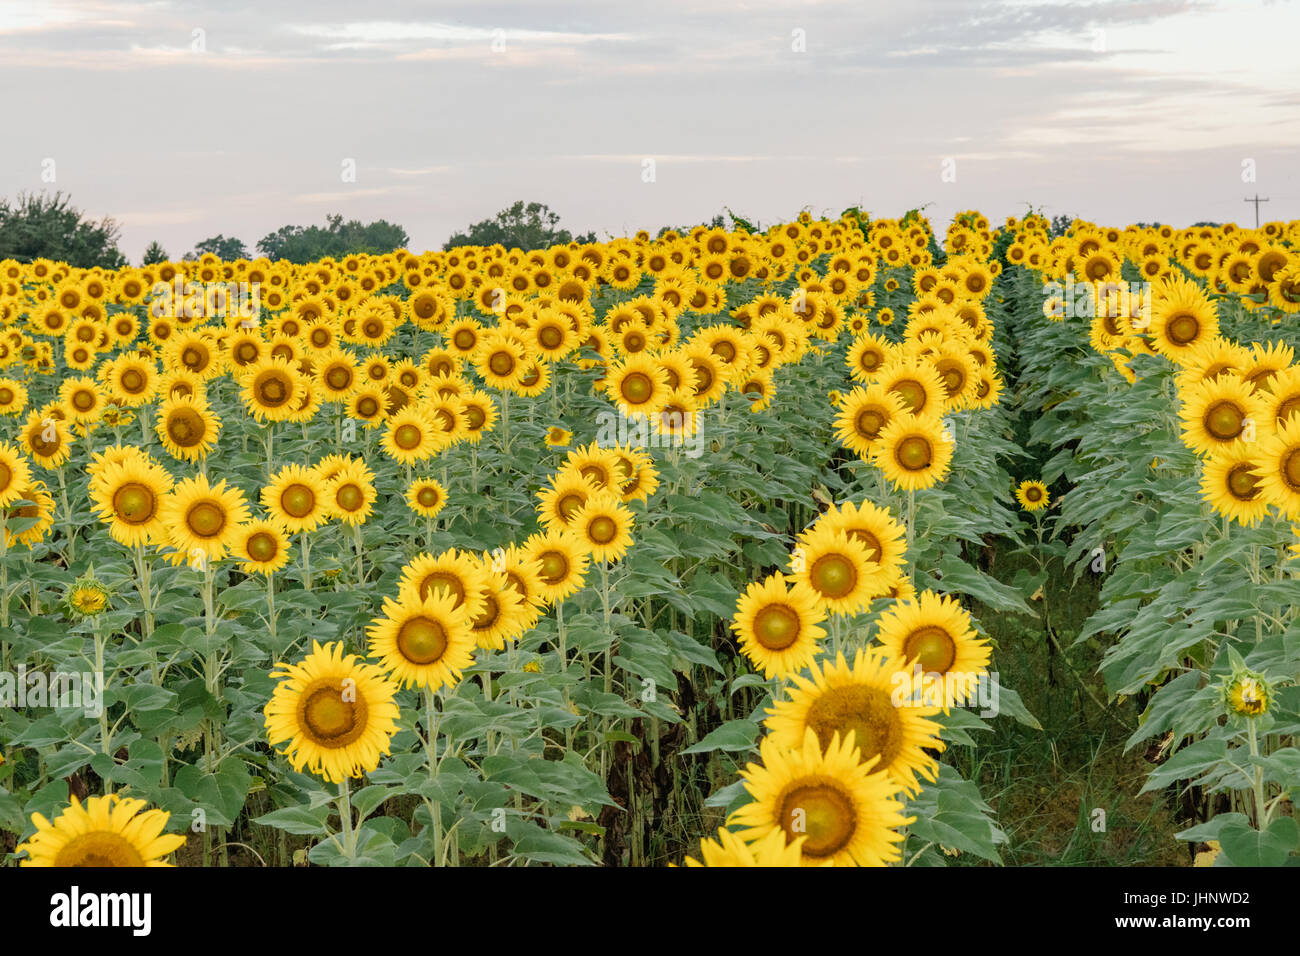 Sunflower field in full bloom in central Alabama, USA. Stock Photo